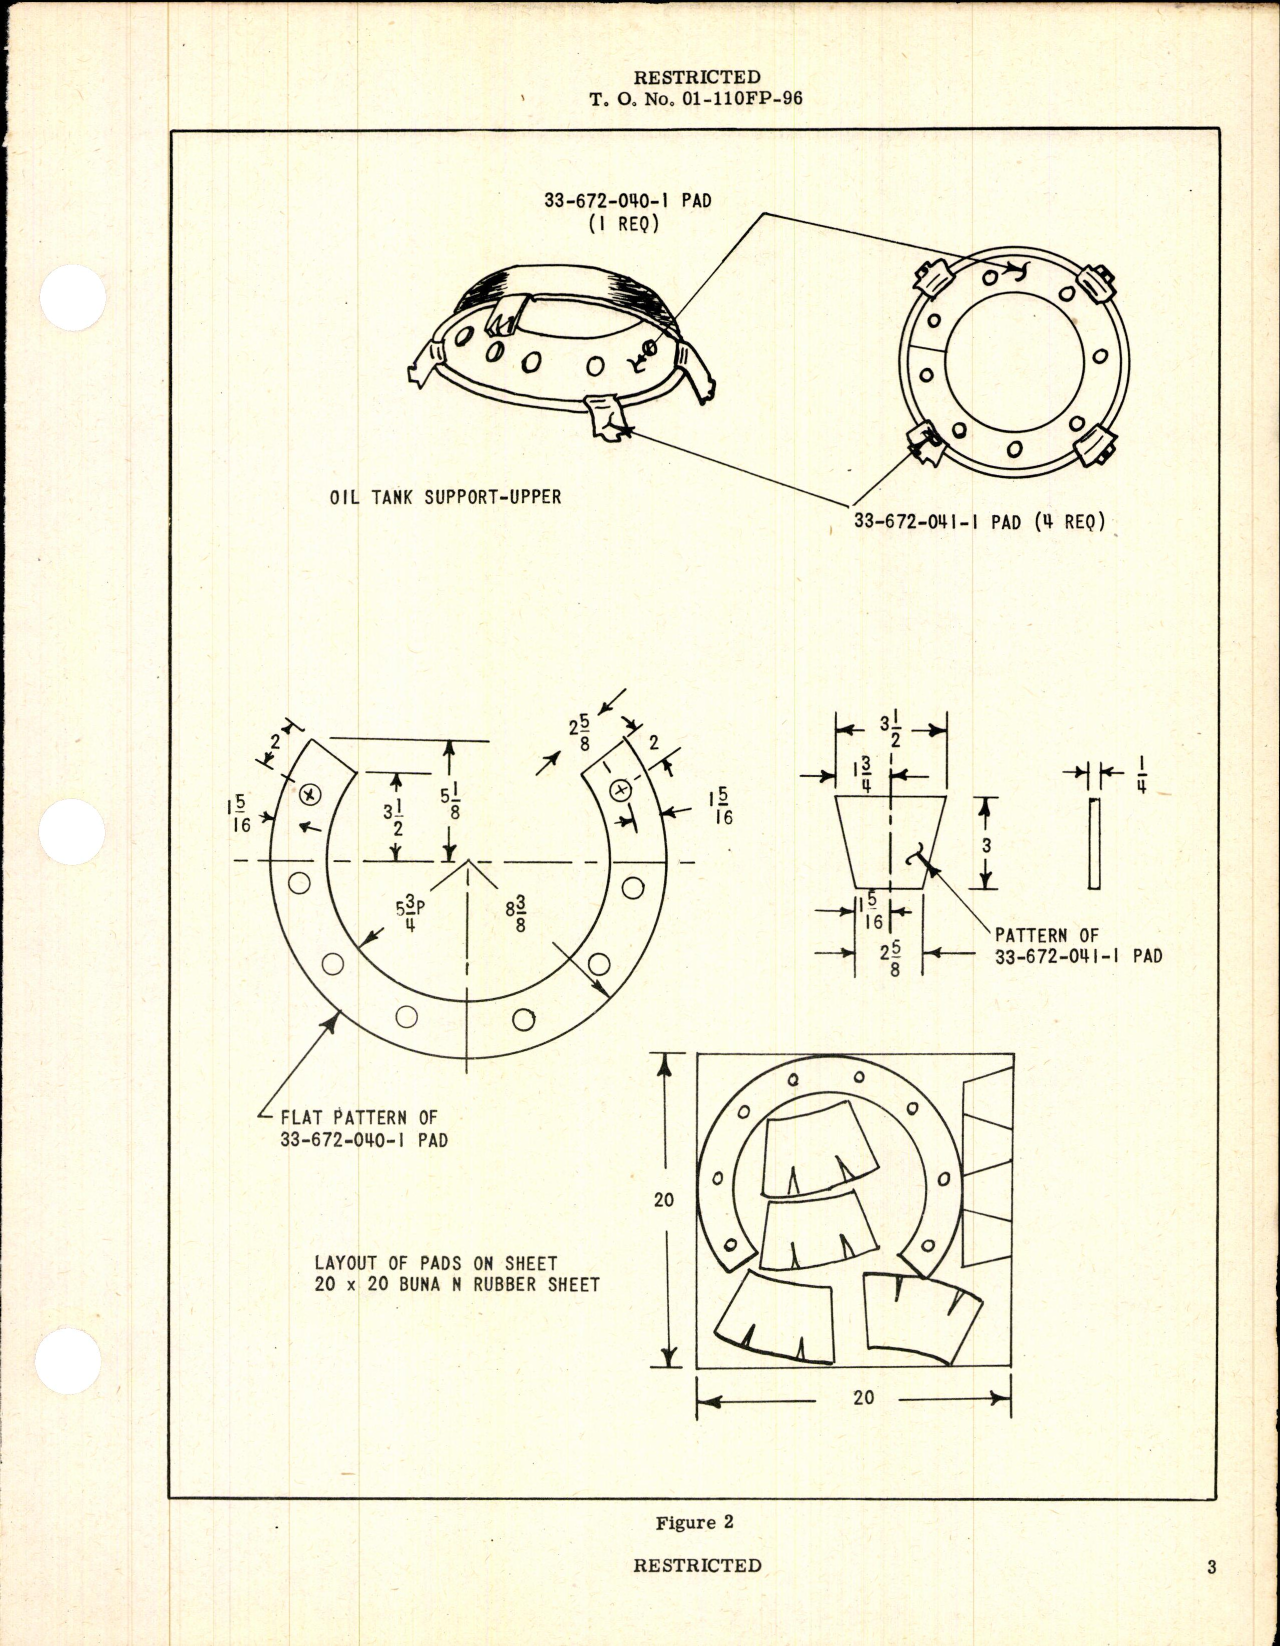 Sample page 3 from AirCorps Library document: Replacement of Main Oil Tank Support Pads